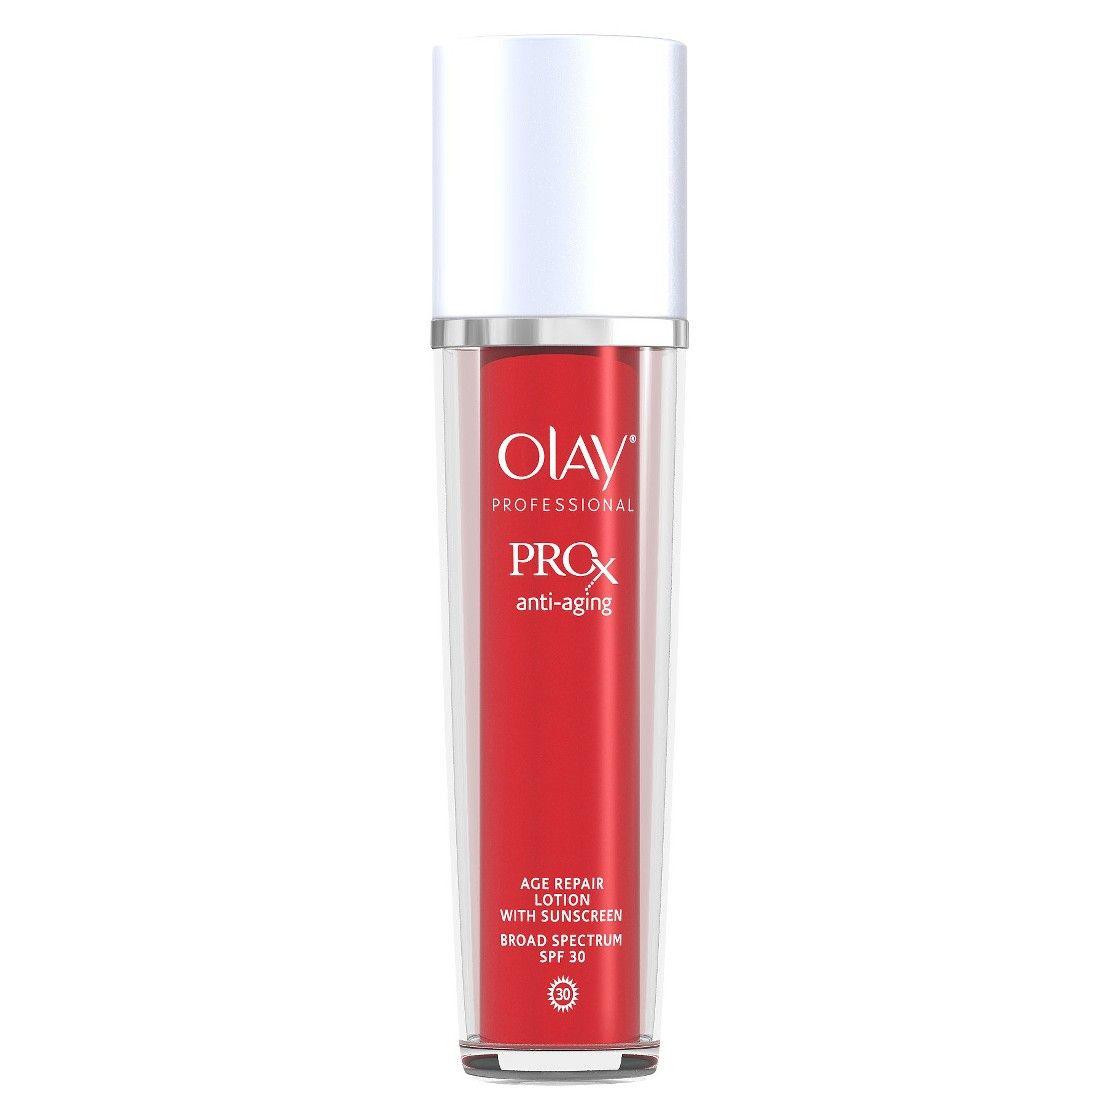 Professional Pro-X Age Repair Lotion with SPF 30